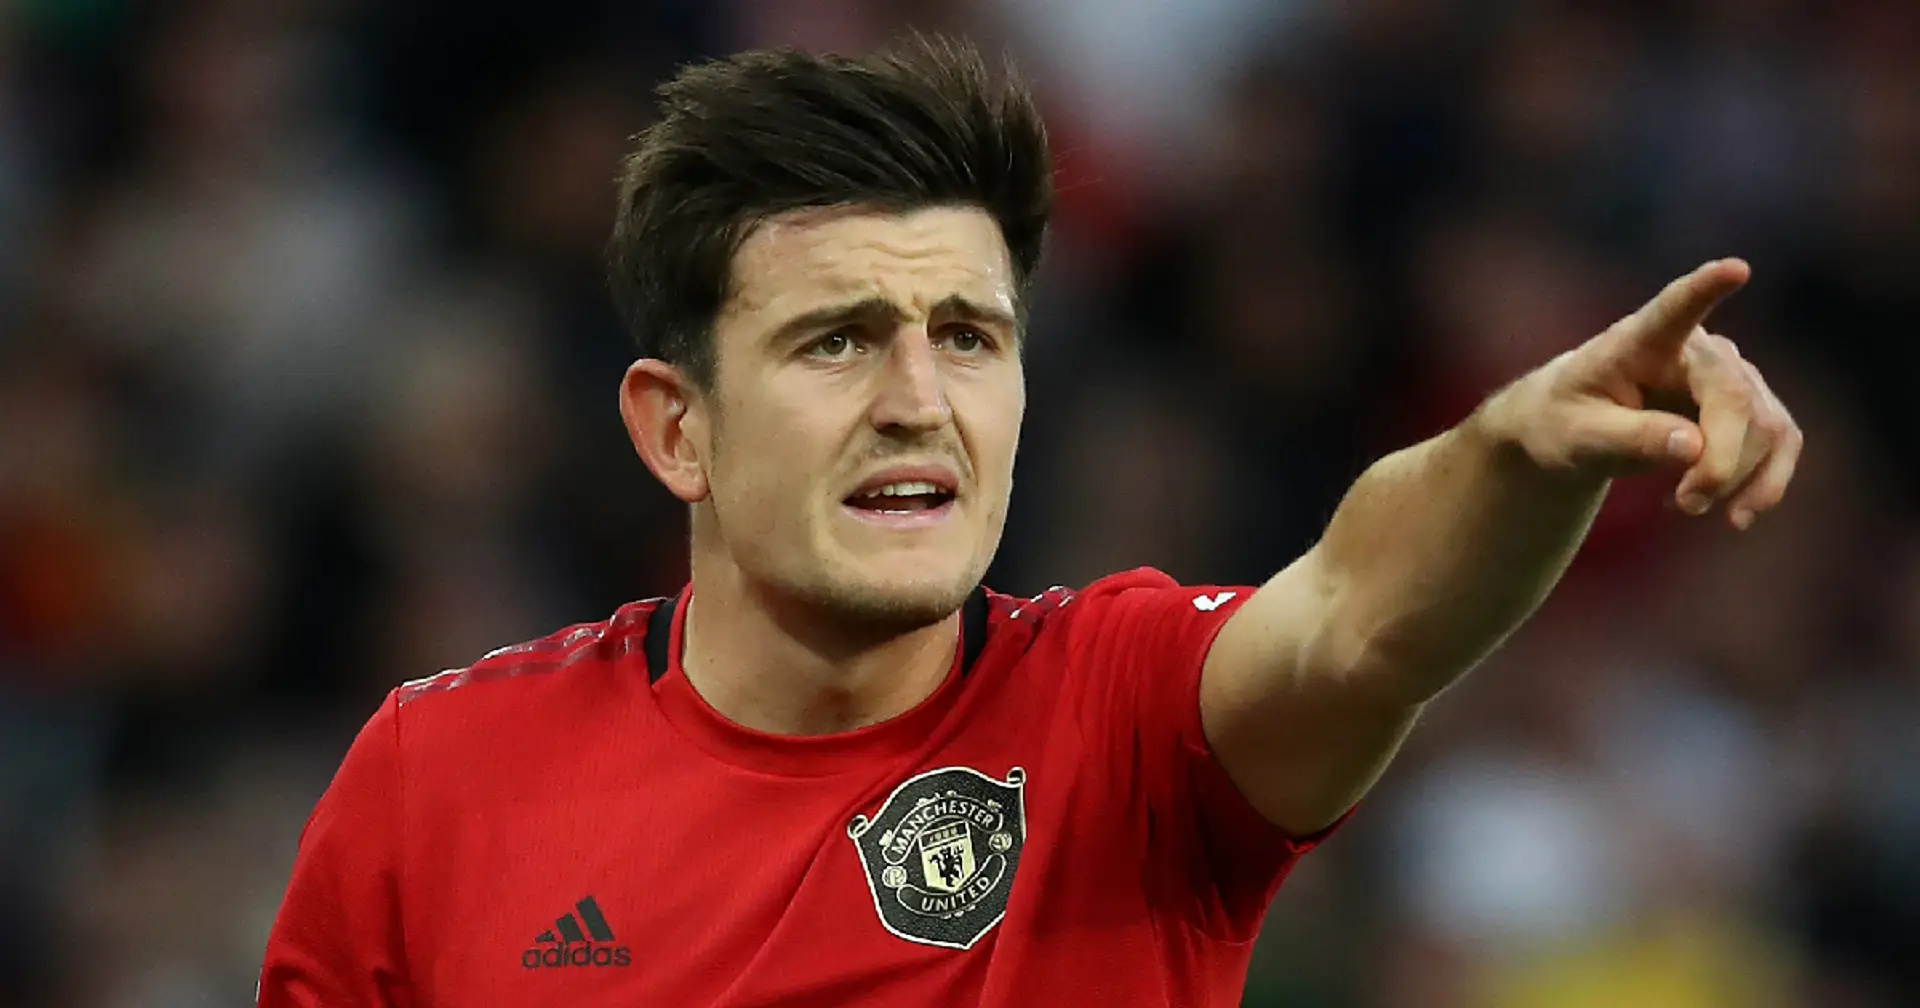 Harry Maguire leads creativity chart among PL centre-backs in 2020/21